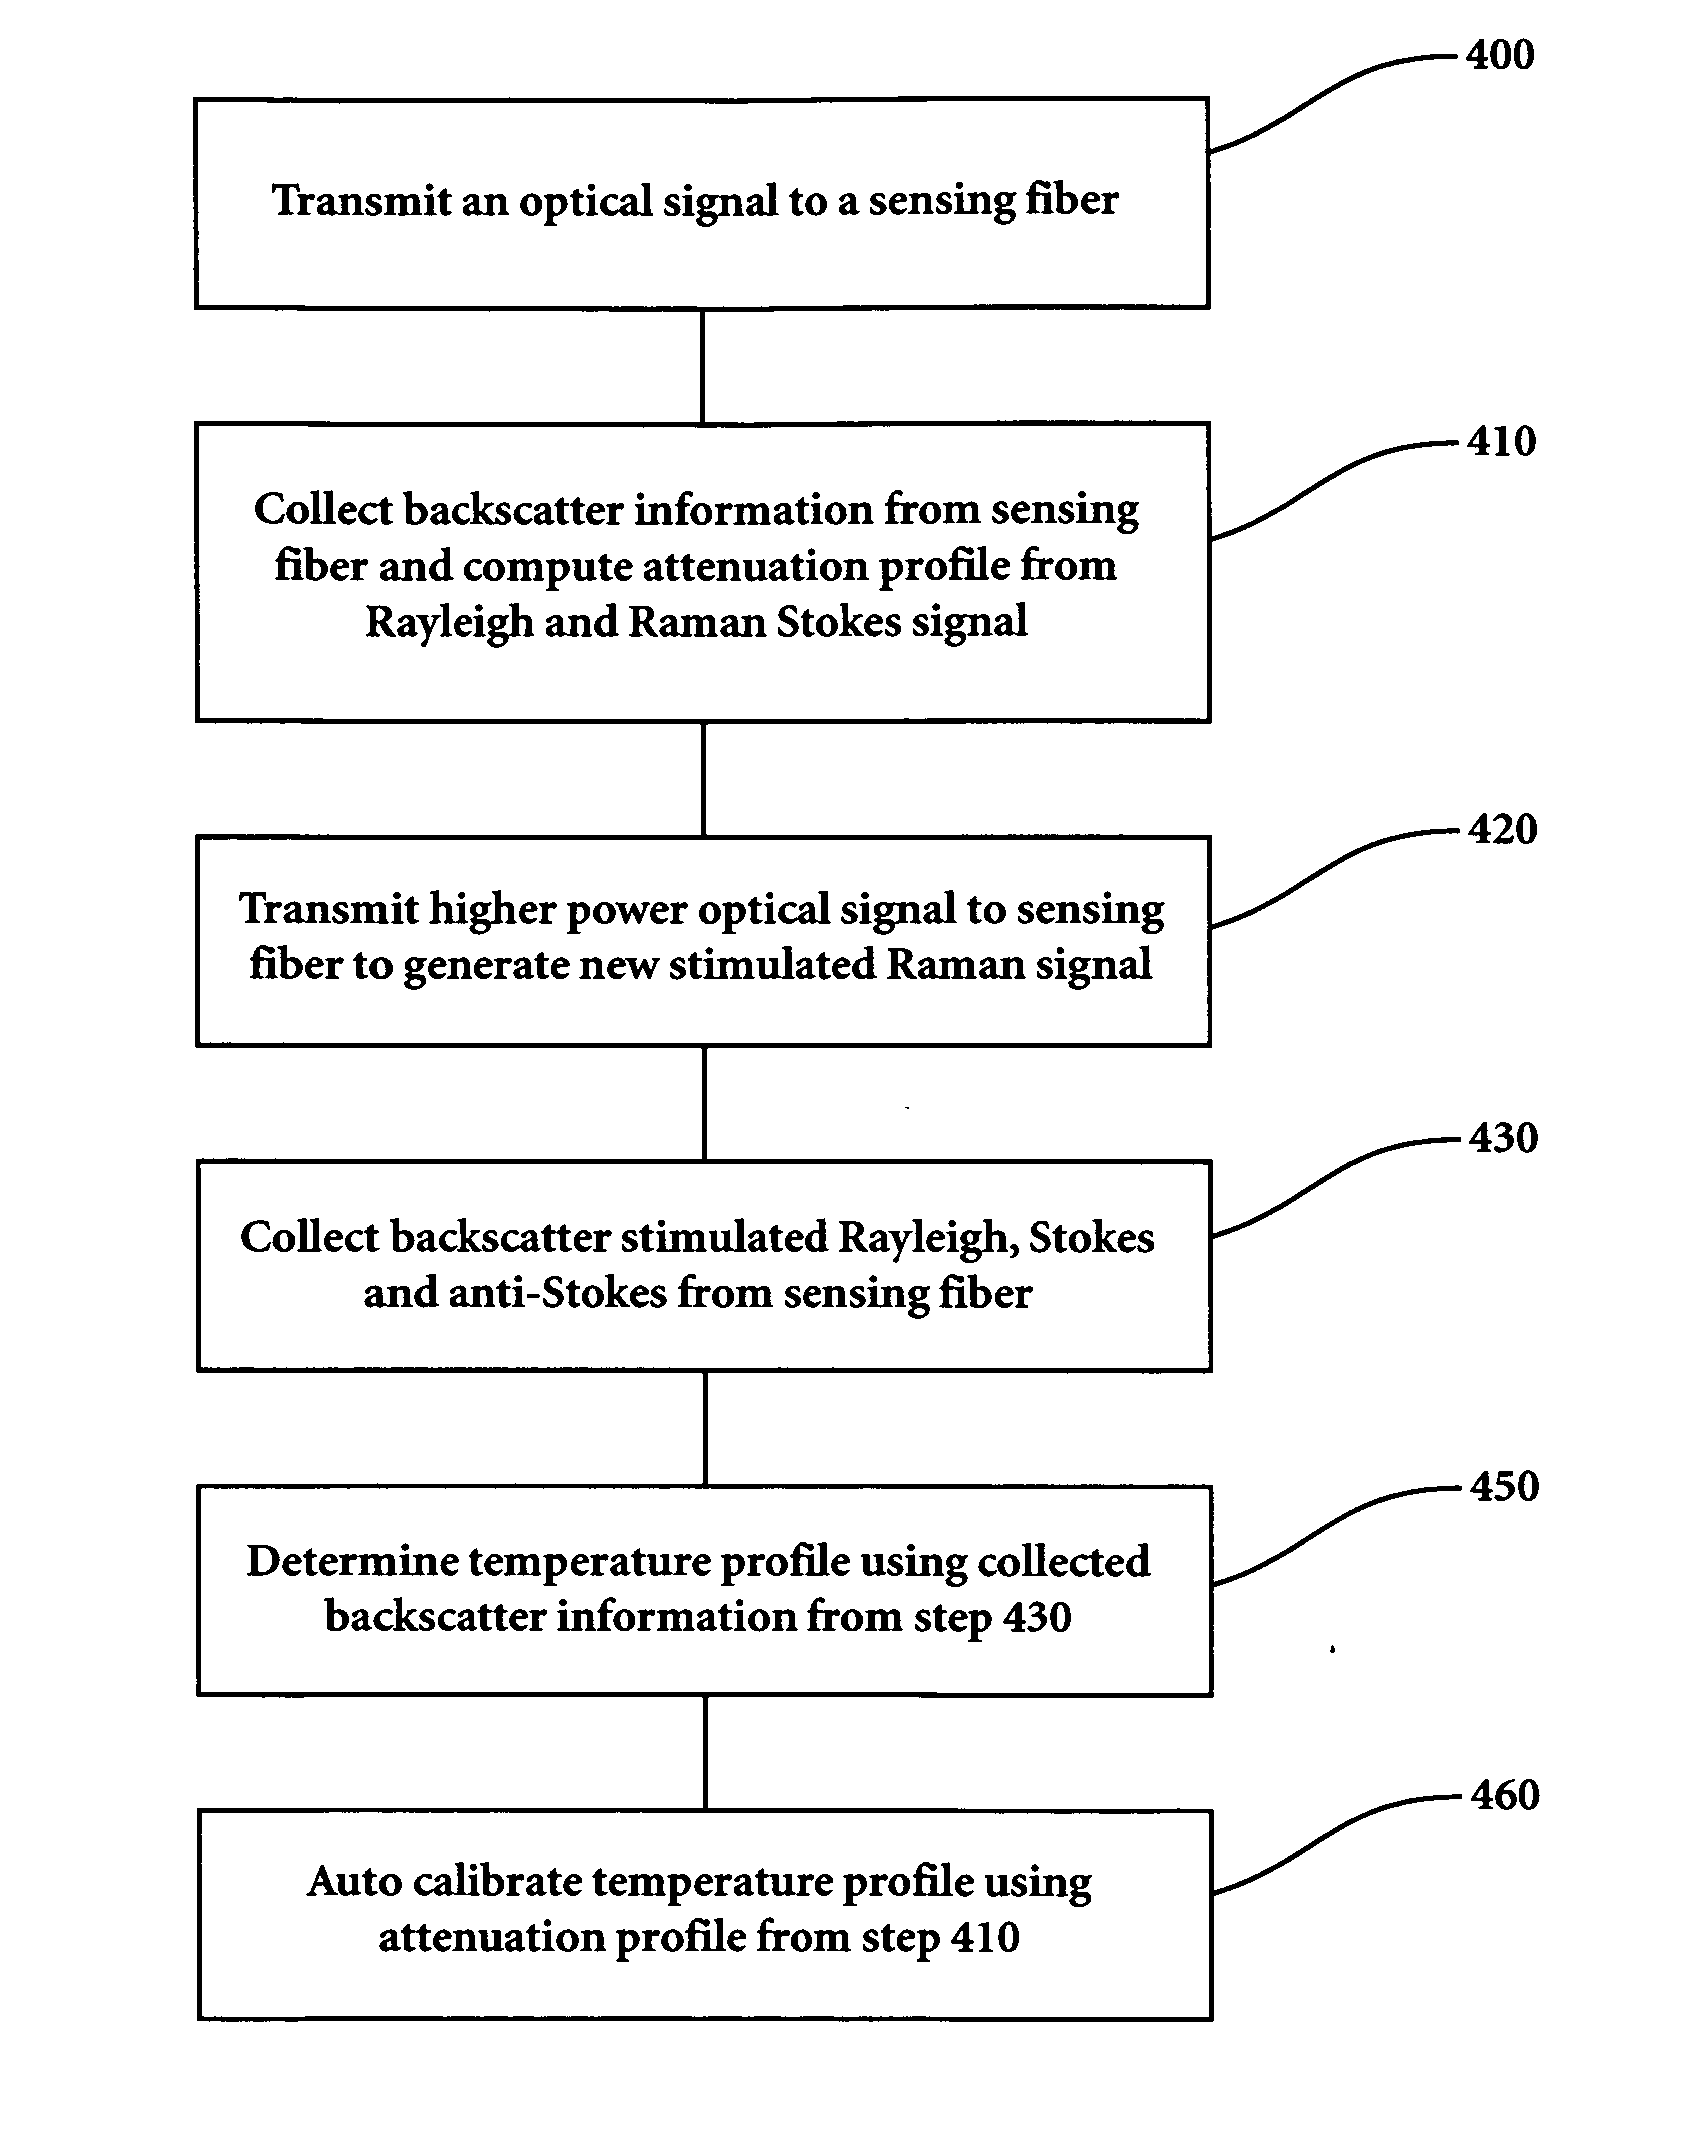 Single light source automatic calibration in distributed temperature sensing